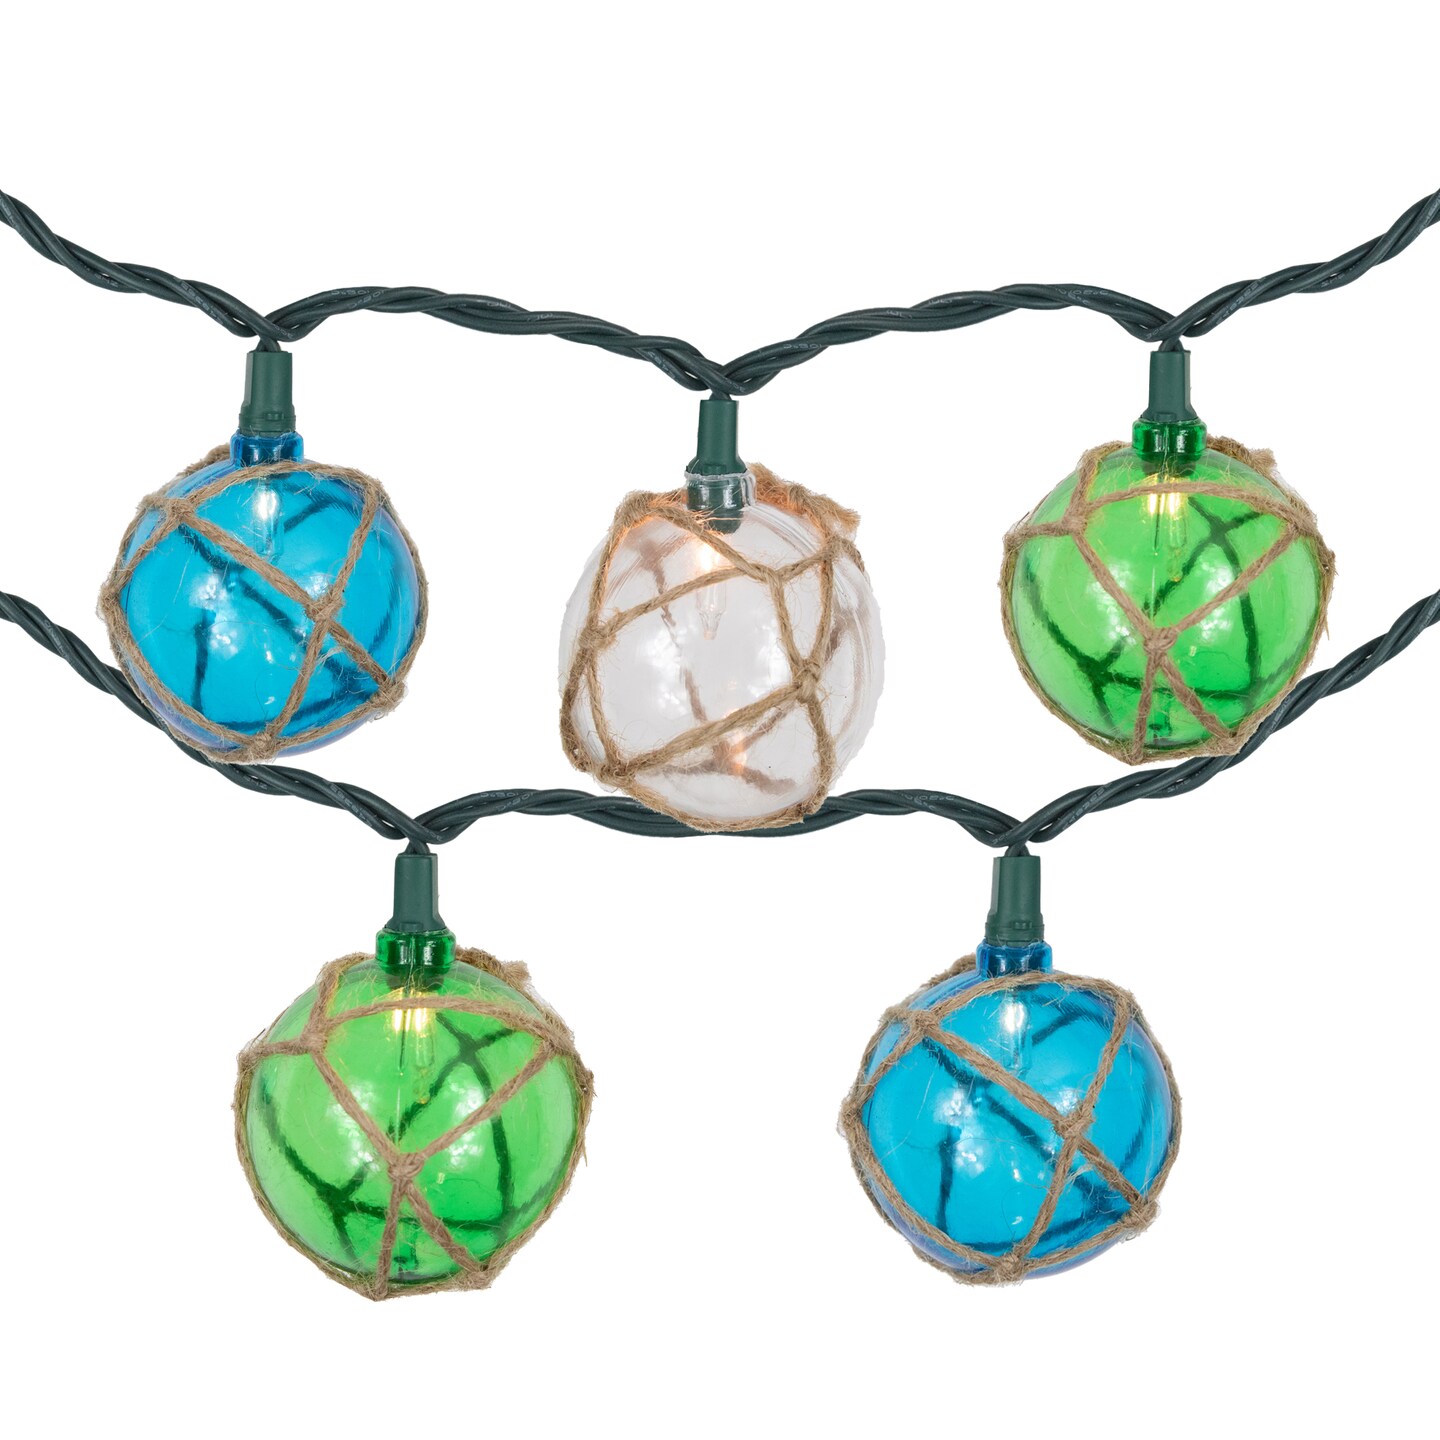 Northlight 10-Count Multi-Color Natural Jute Wrapped Ball Patio